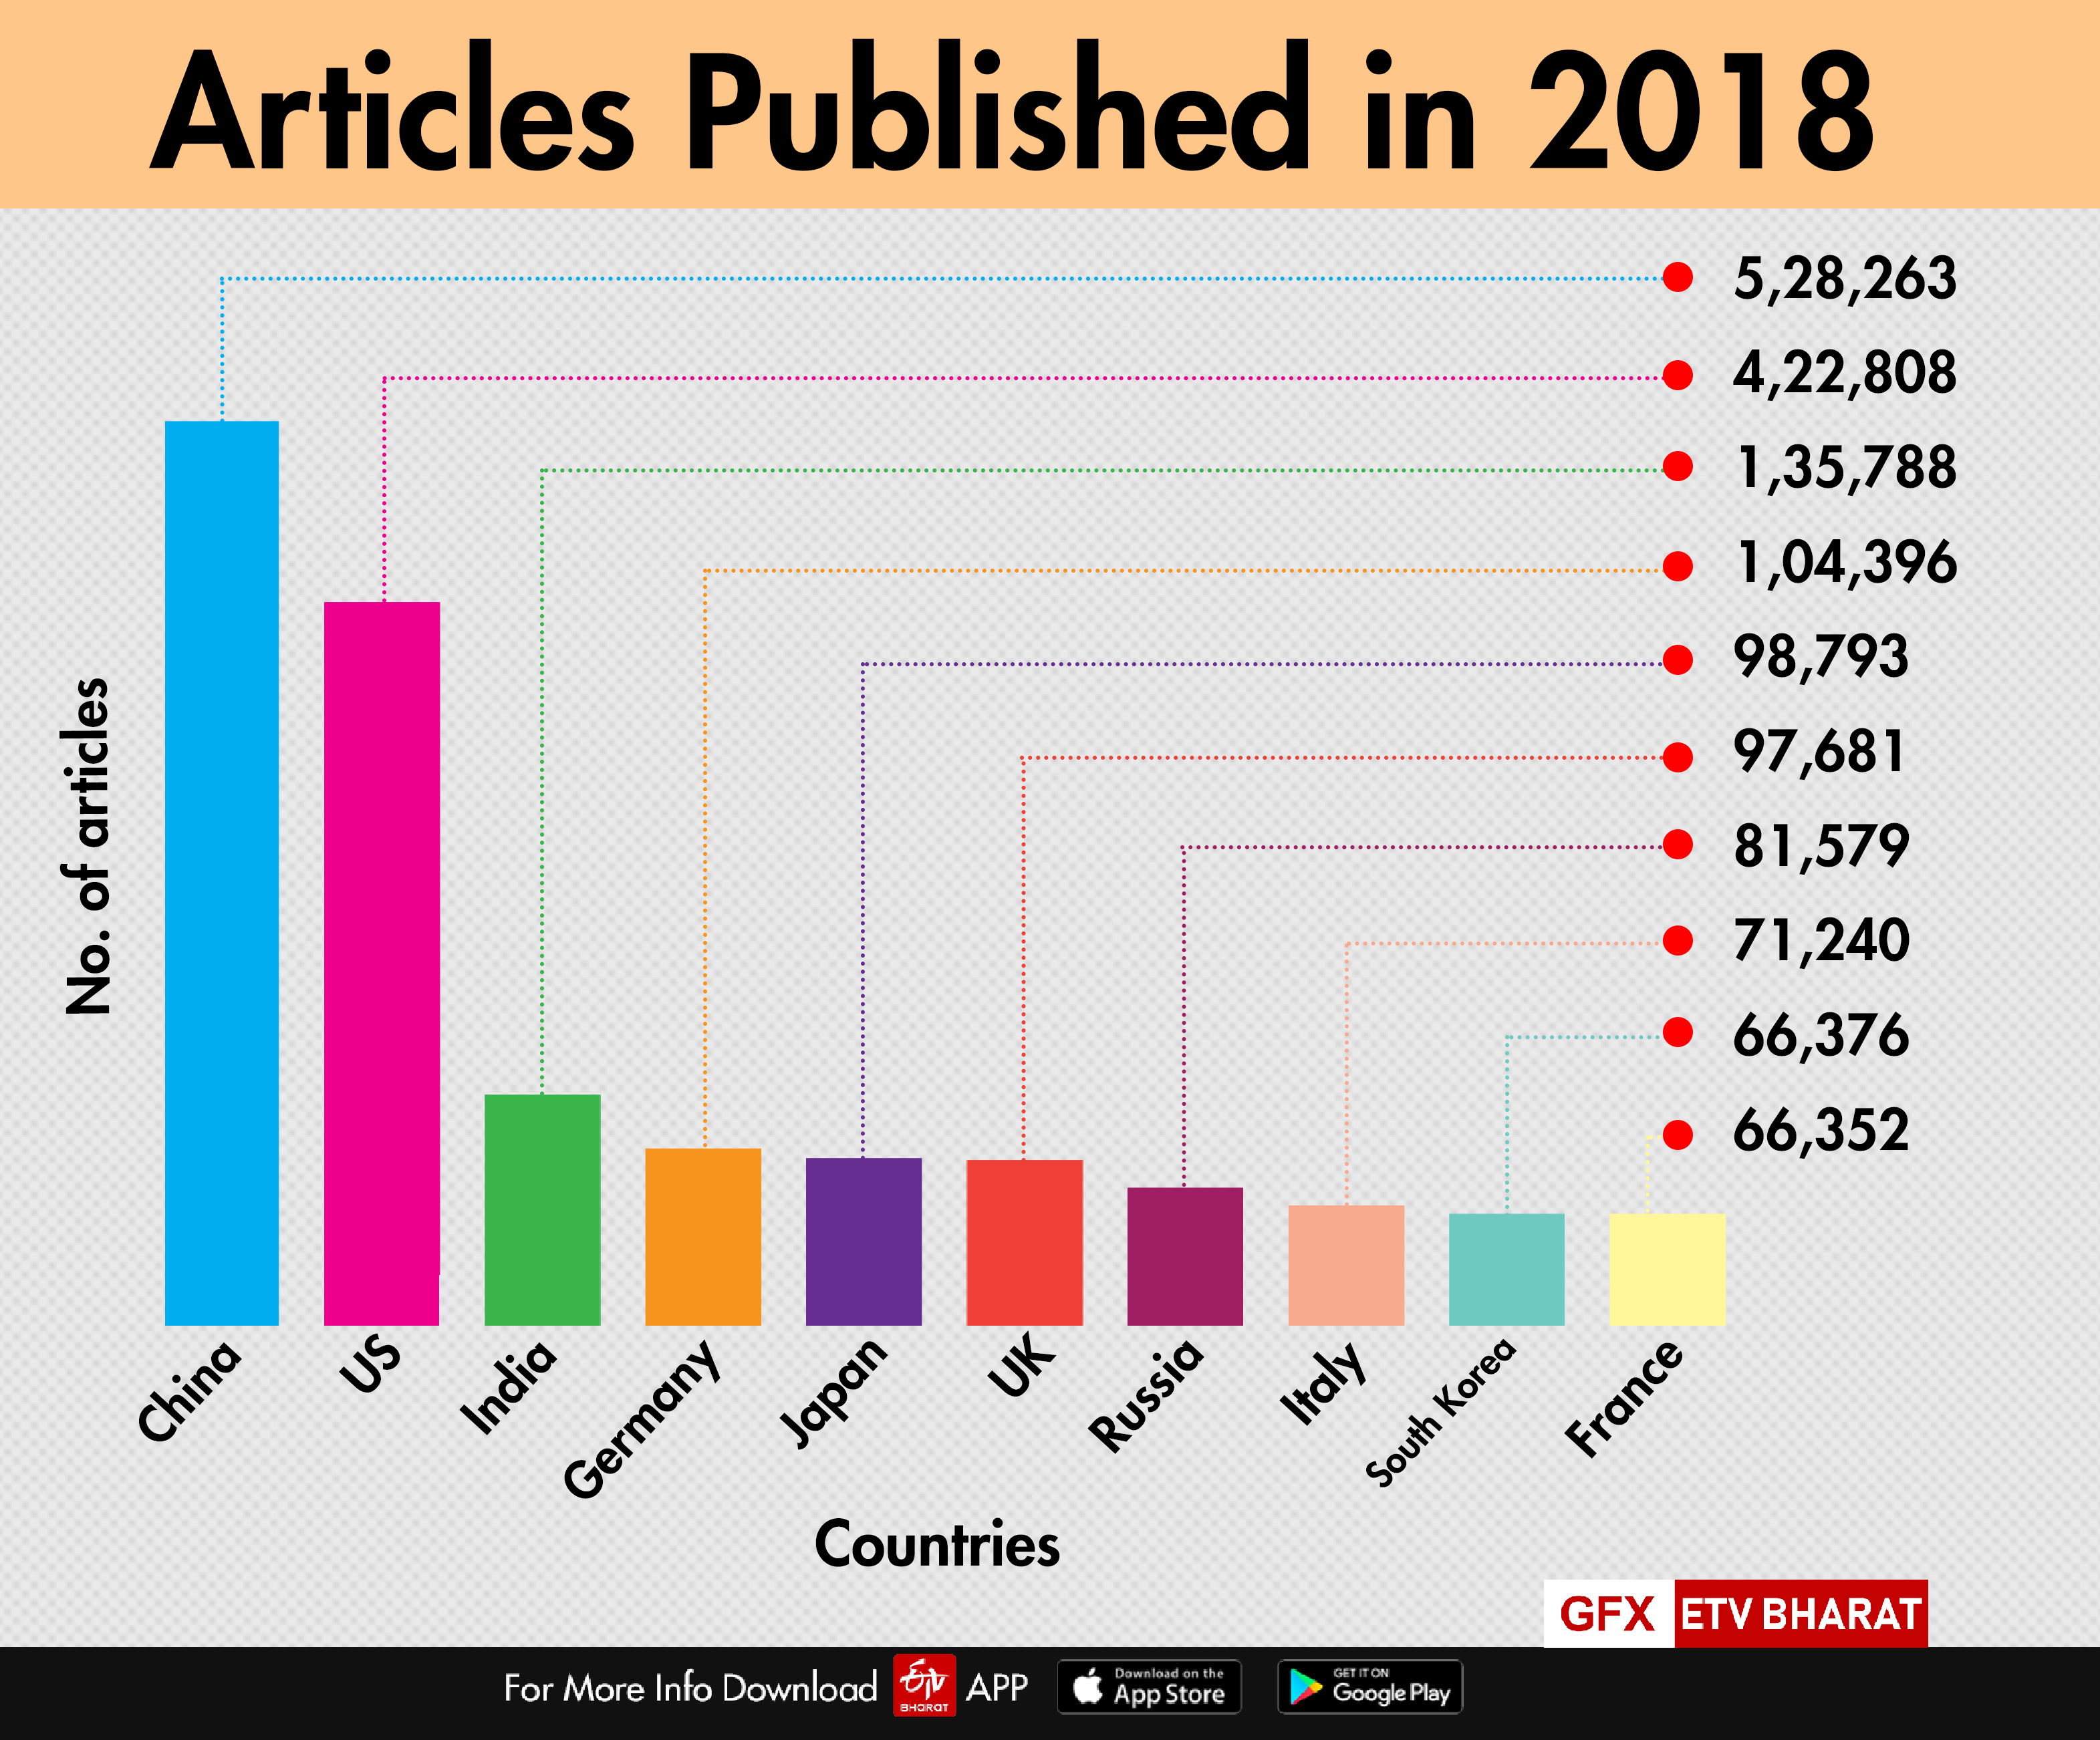 Articles published in 2018 top 10 countries